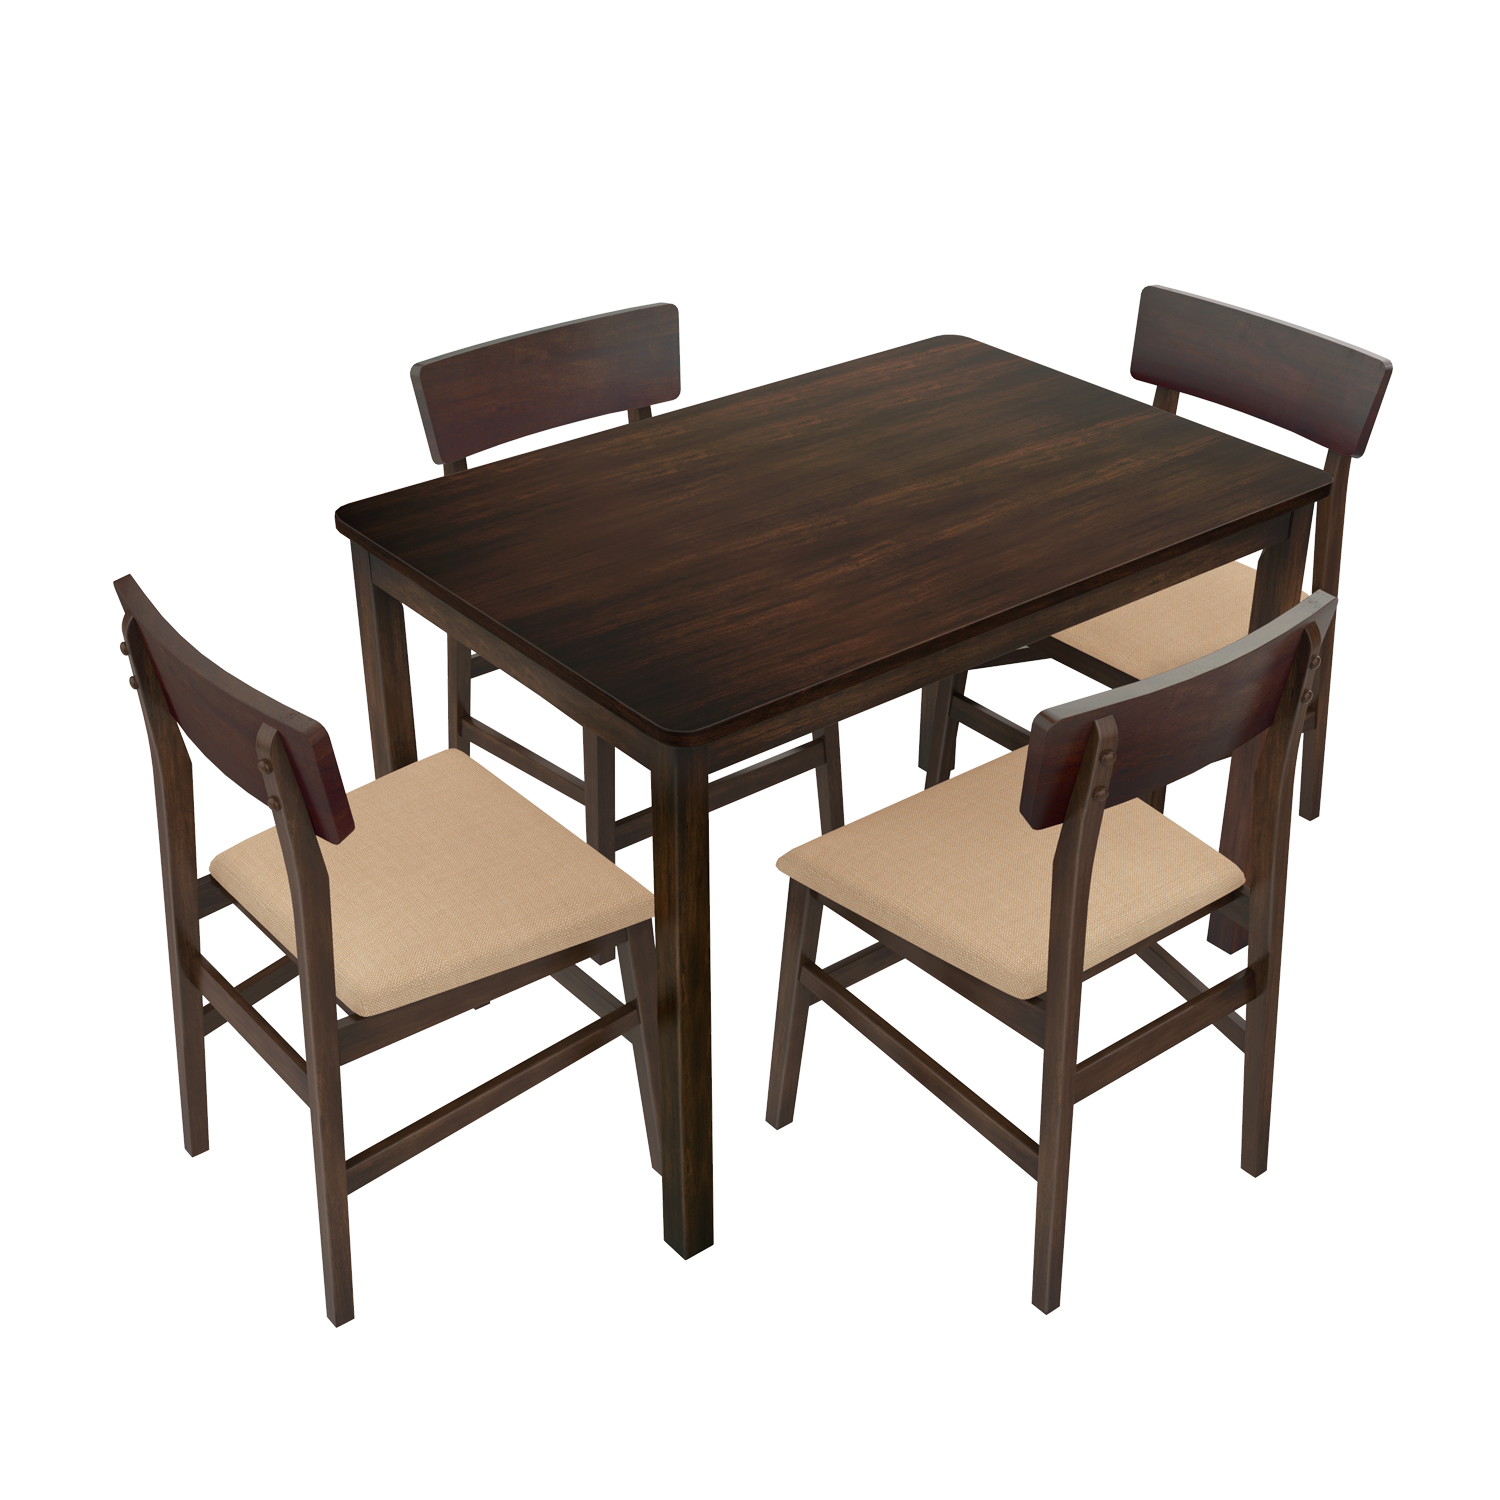 Ace 4 Seater Dining Set In Wood, 4 Seat Dining Room Table And Chairs